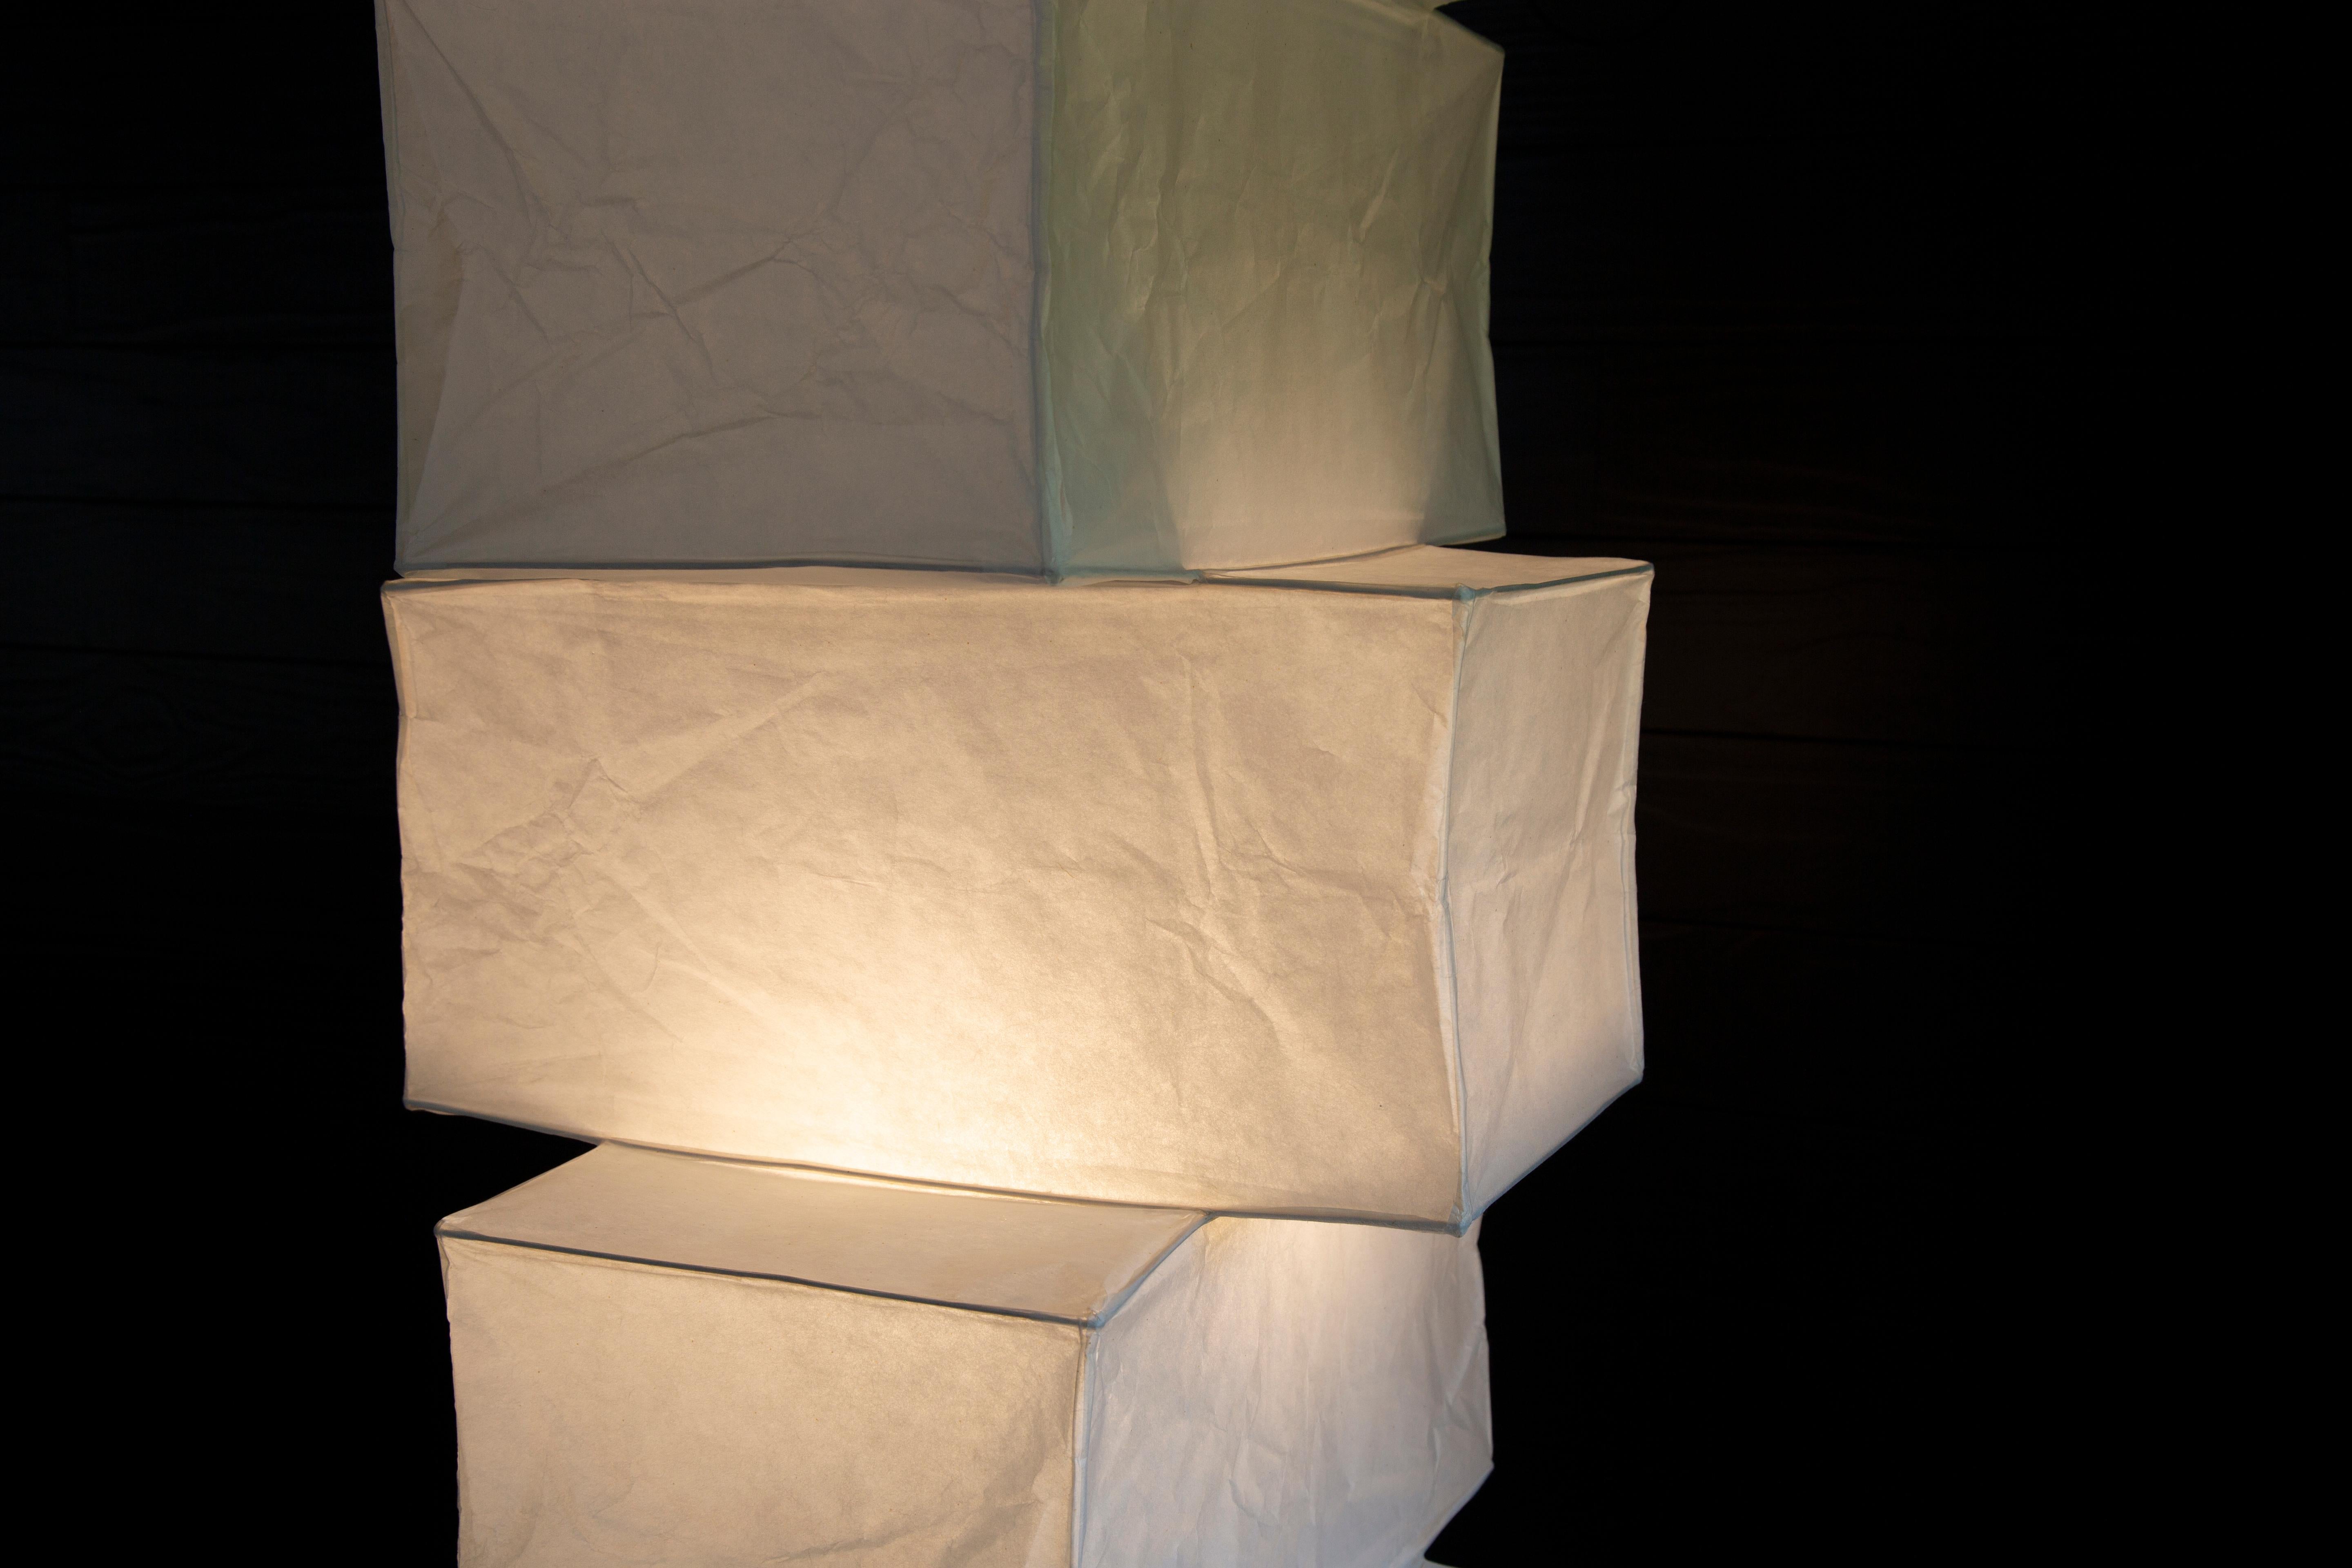 Iconic modern design. This 1990s Isamu Noguchi UF4-L10 lamp consisting of one shade of 7 light boxes diffusing light from a single bulb. This lamp puts off a great soft light. Organic forms created from handmade Washi paper and bamboo ribbing